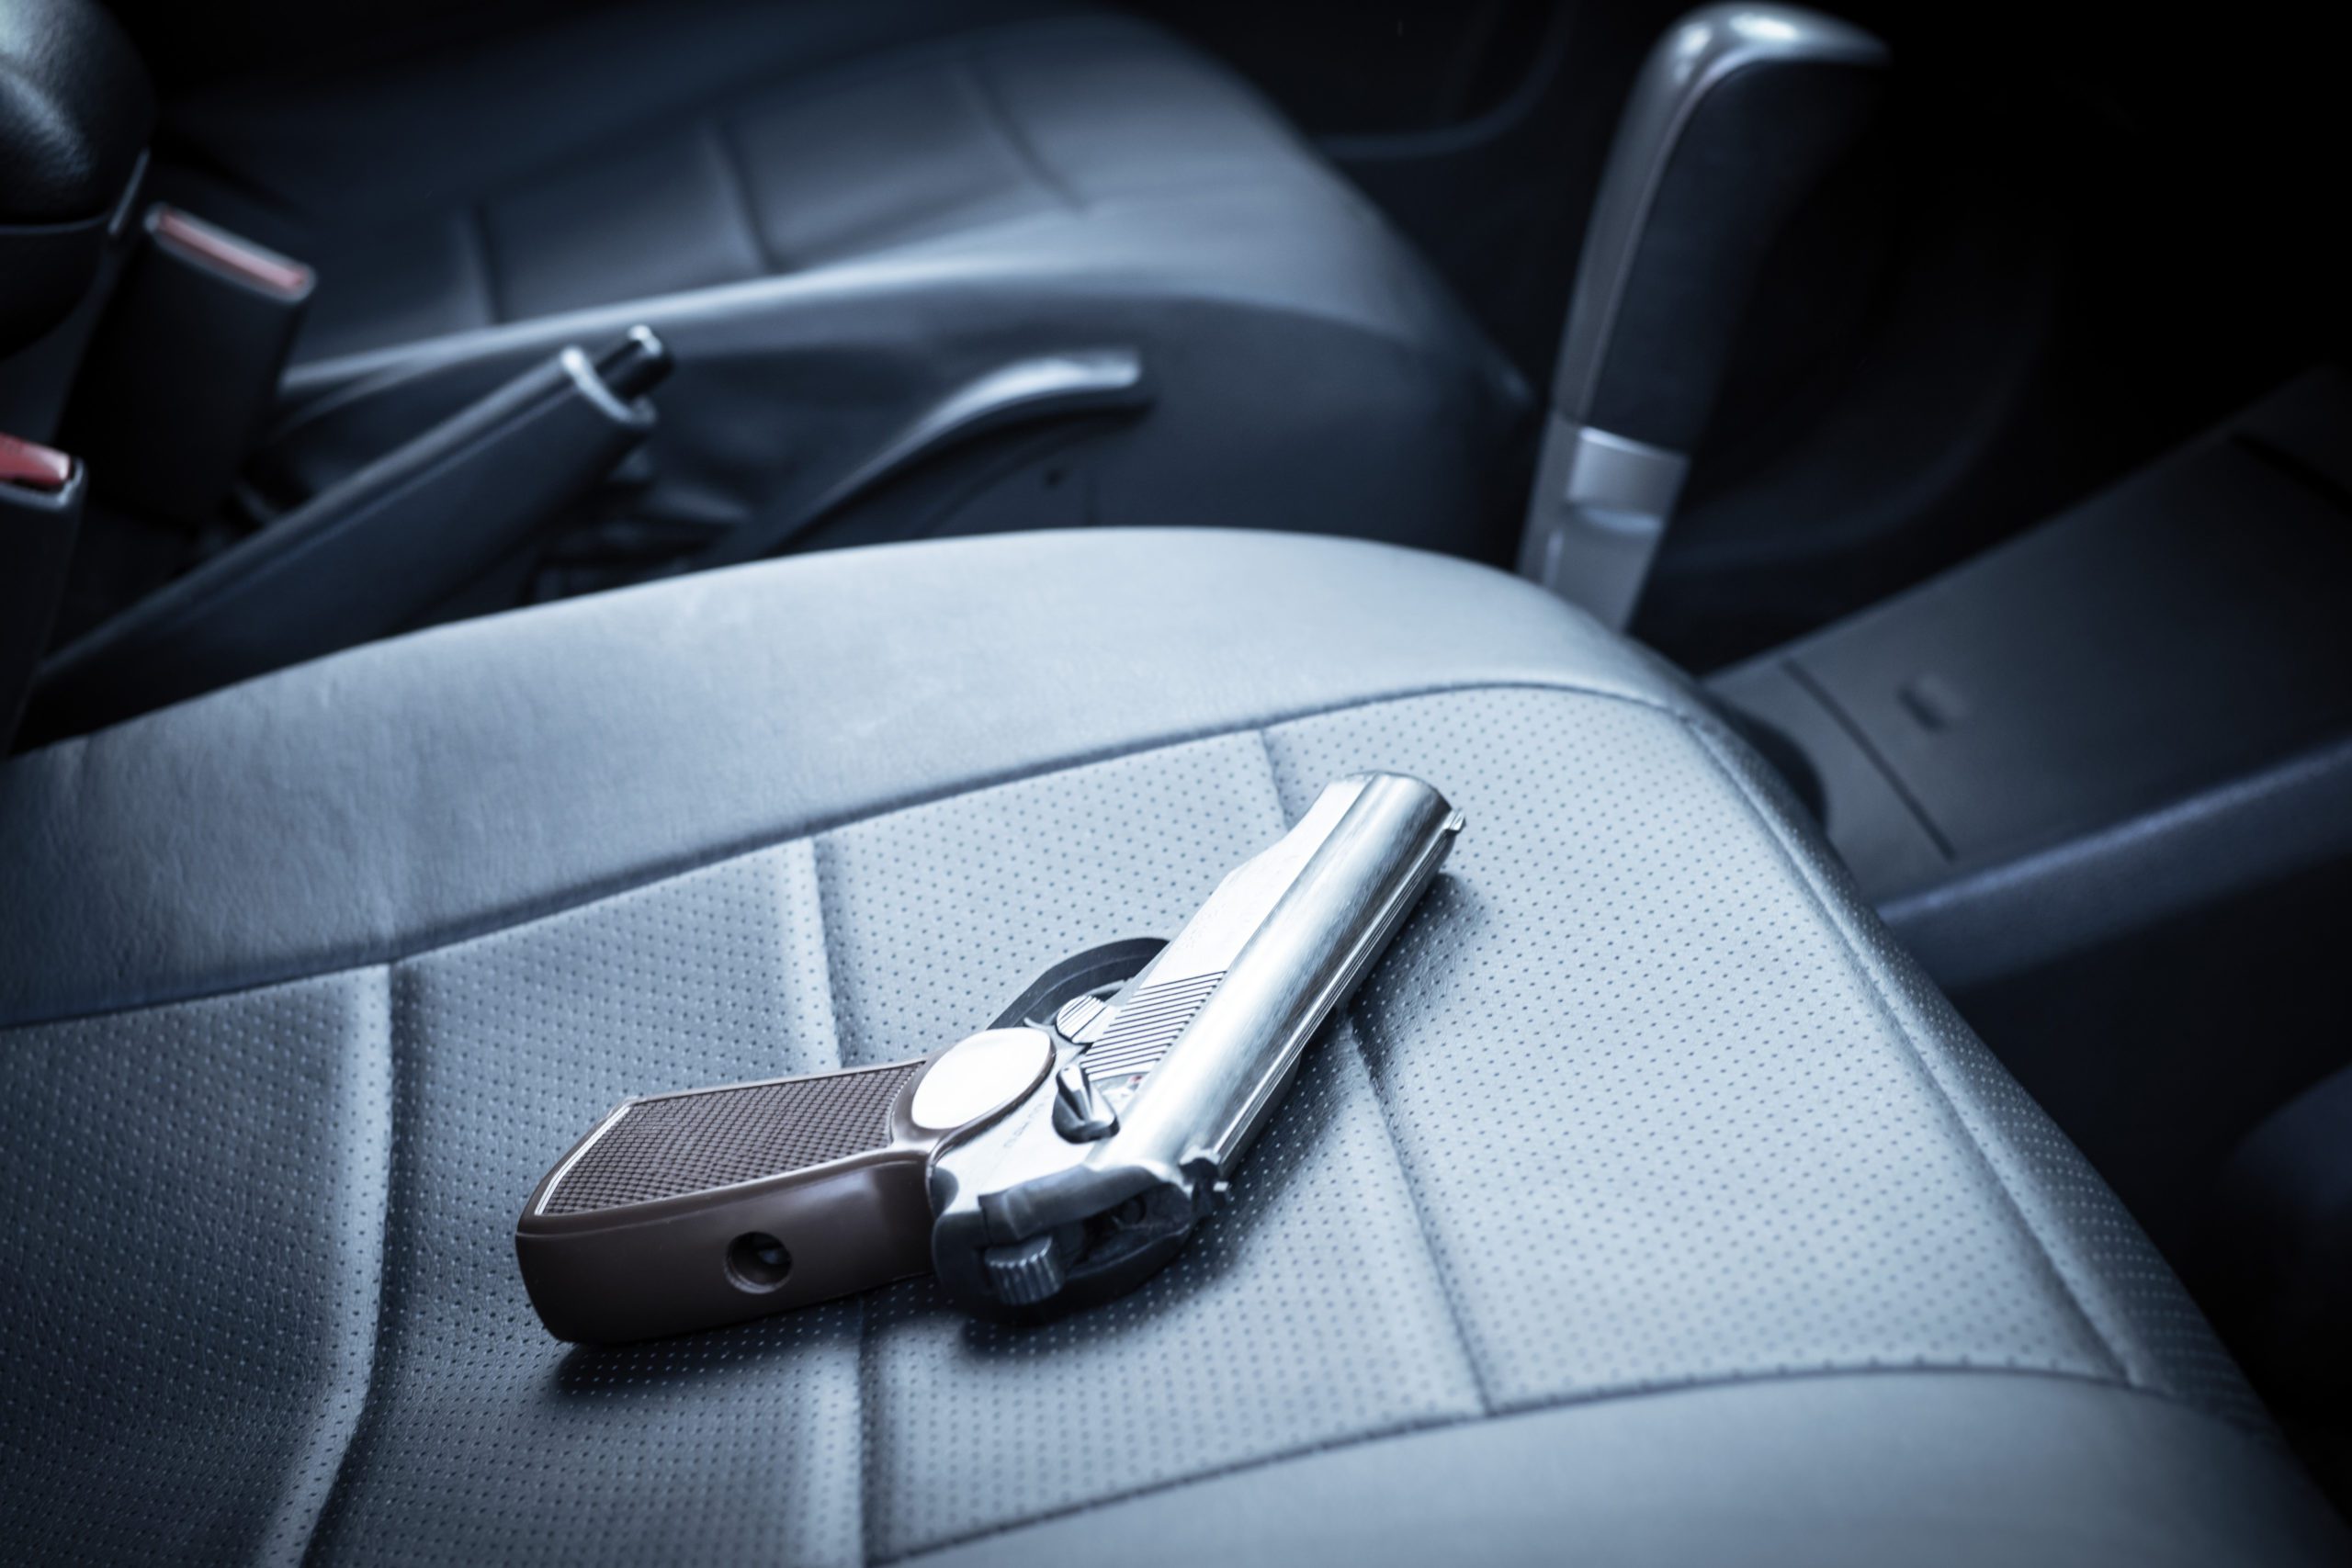 the gun is on the car seat. criminal district of the city